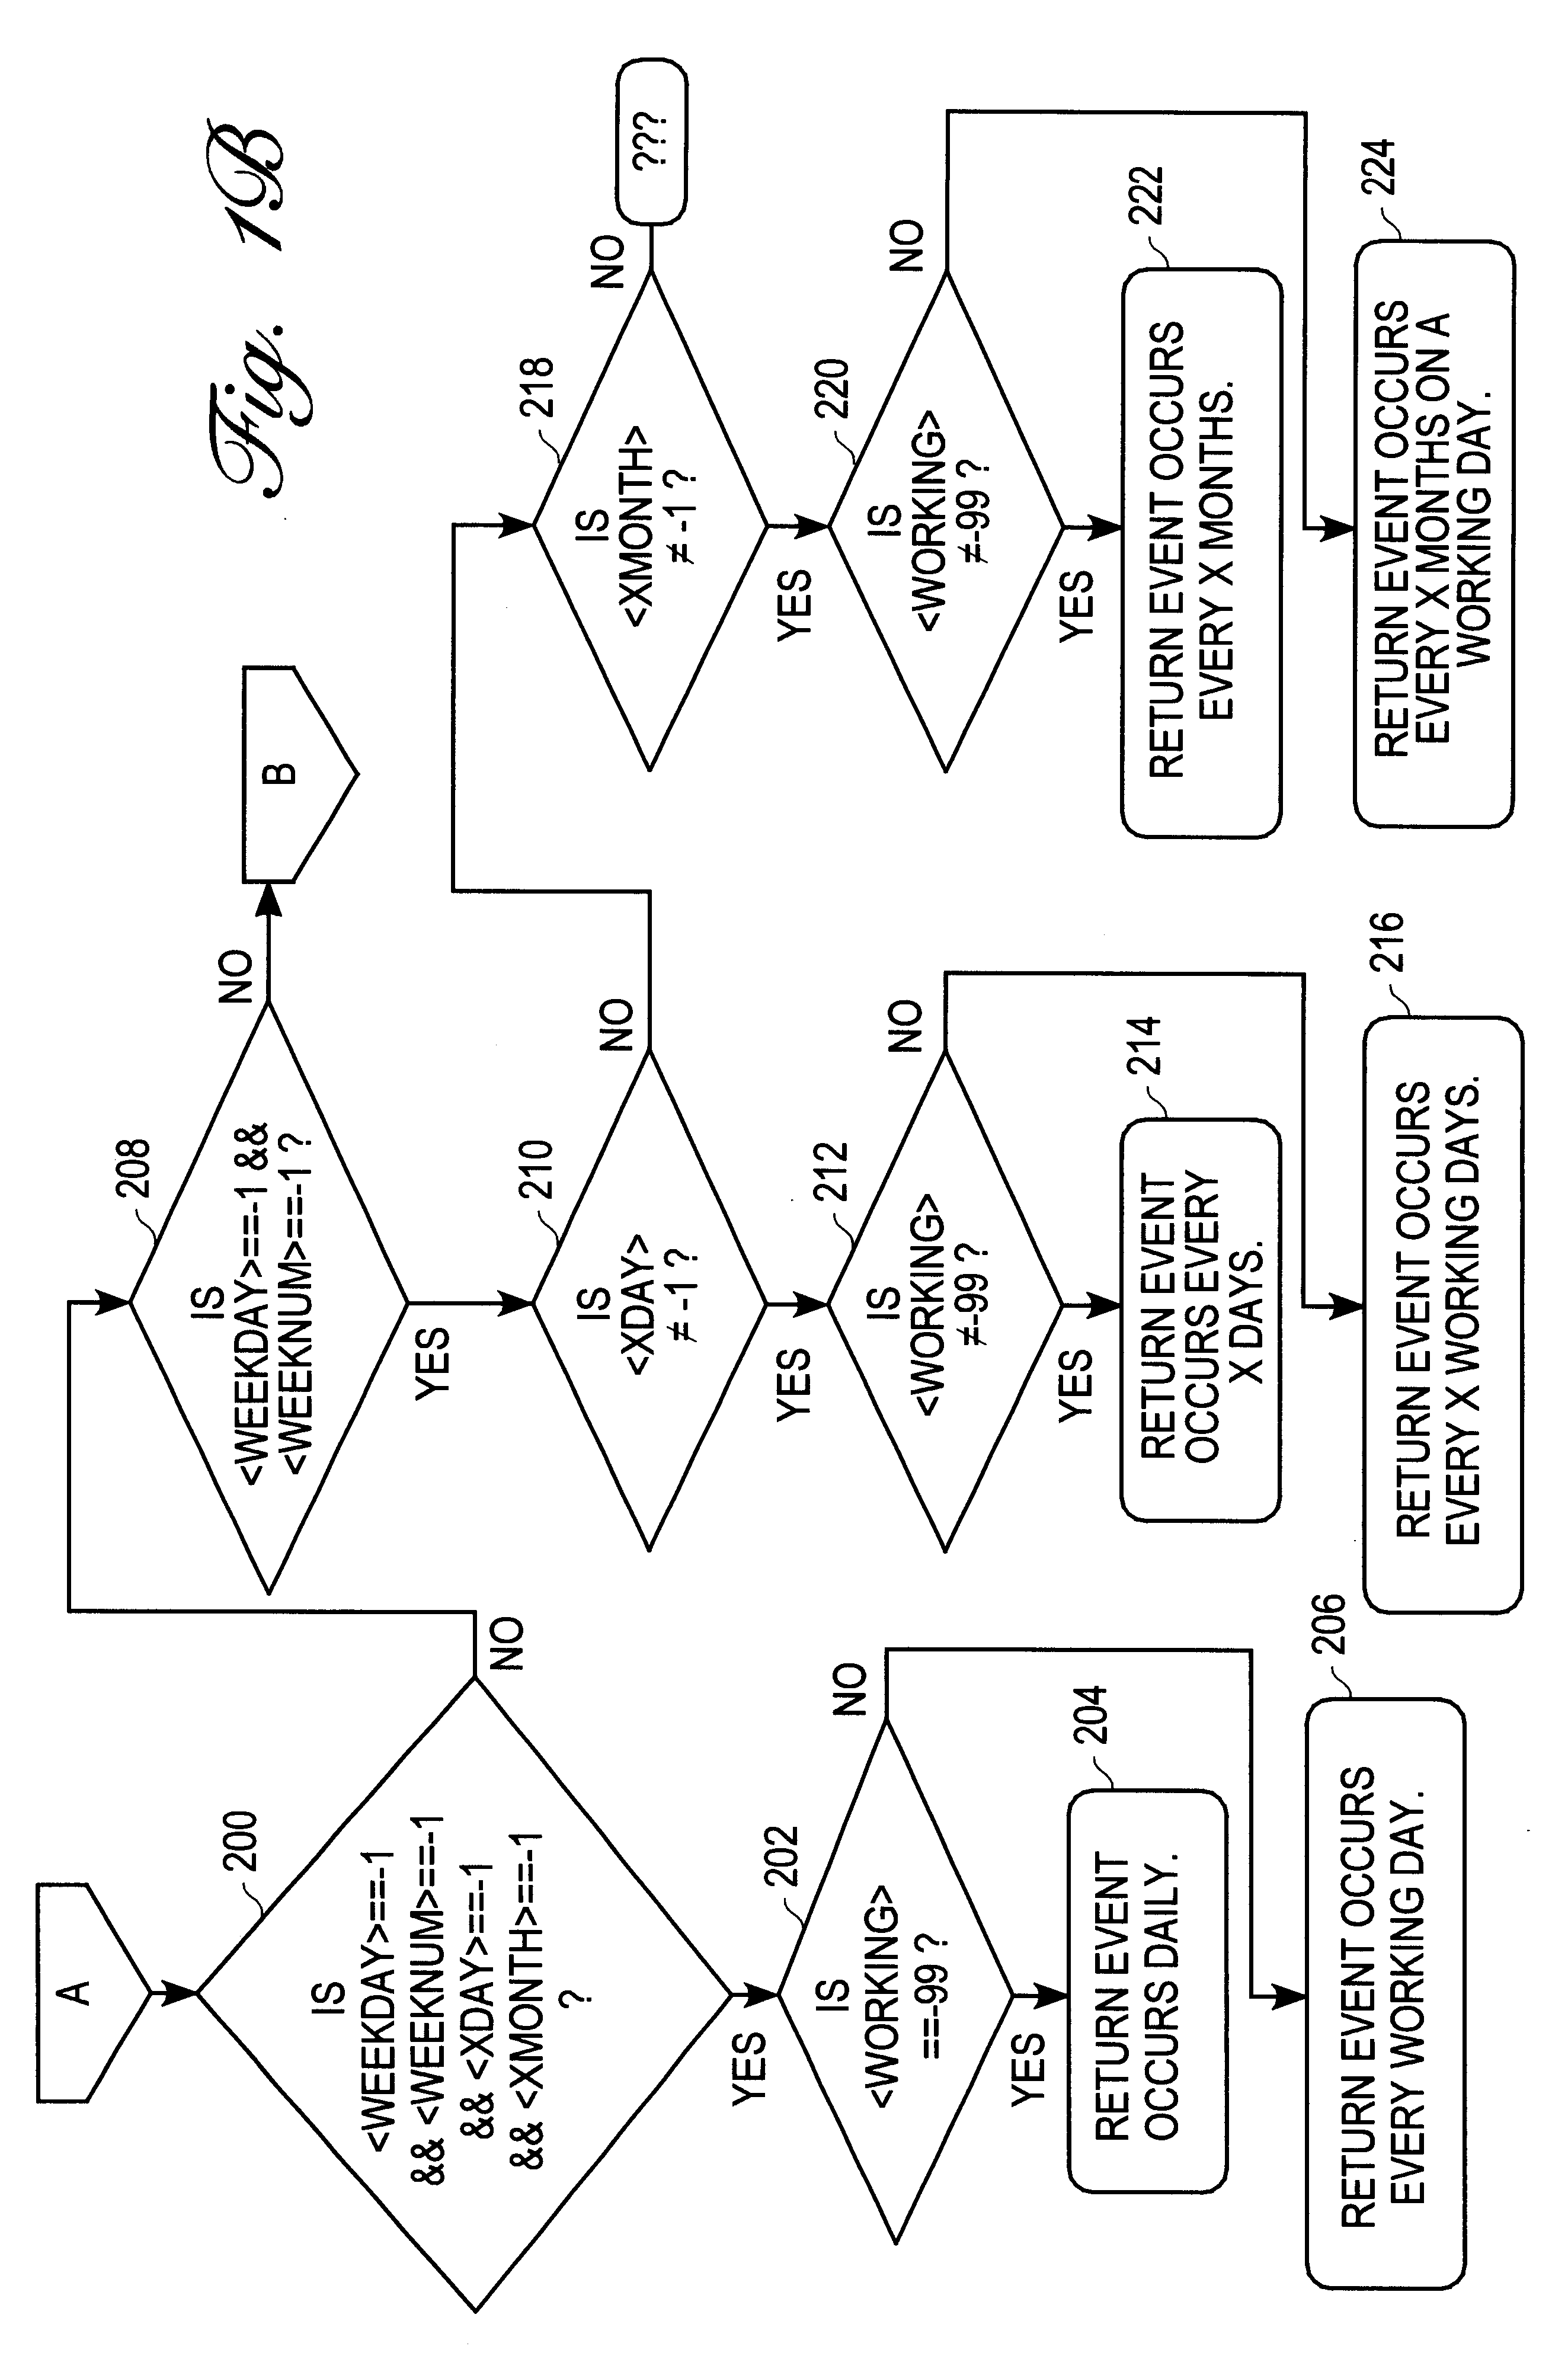 Method and apparatus for generating recurring events in a calendar/schedule system